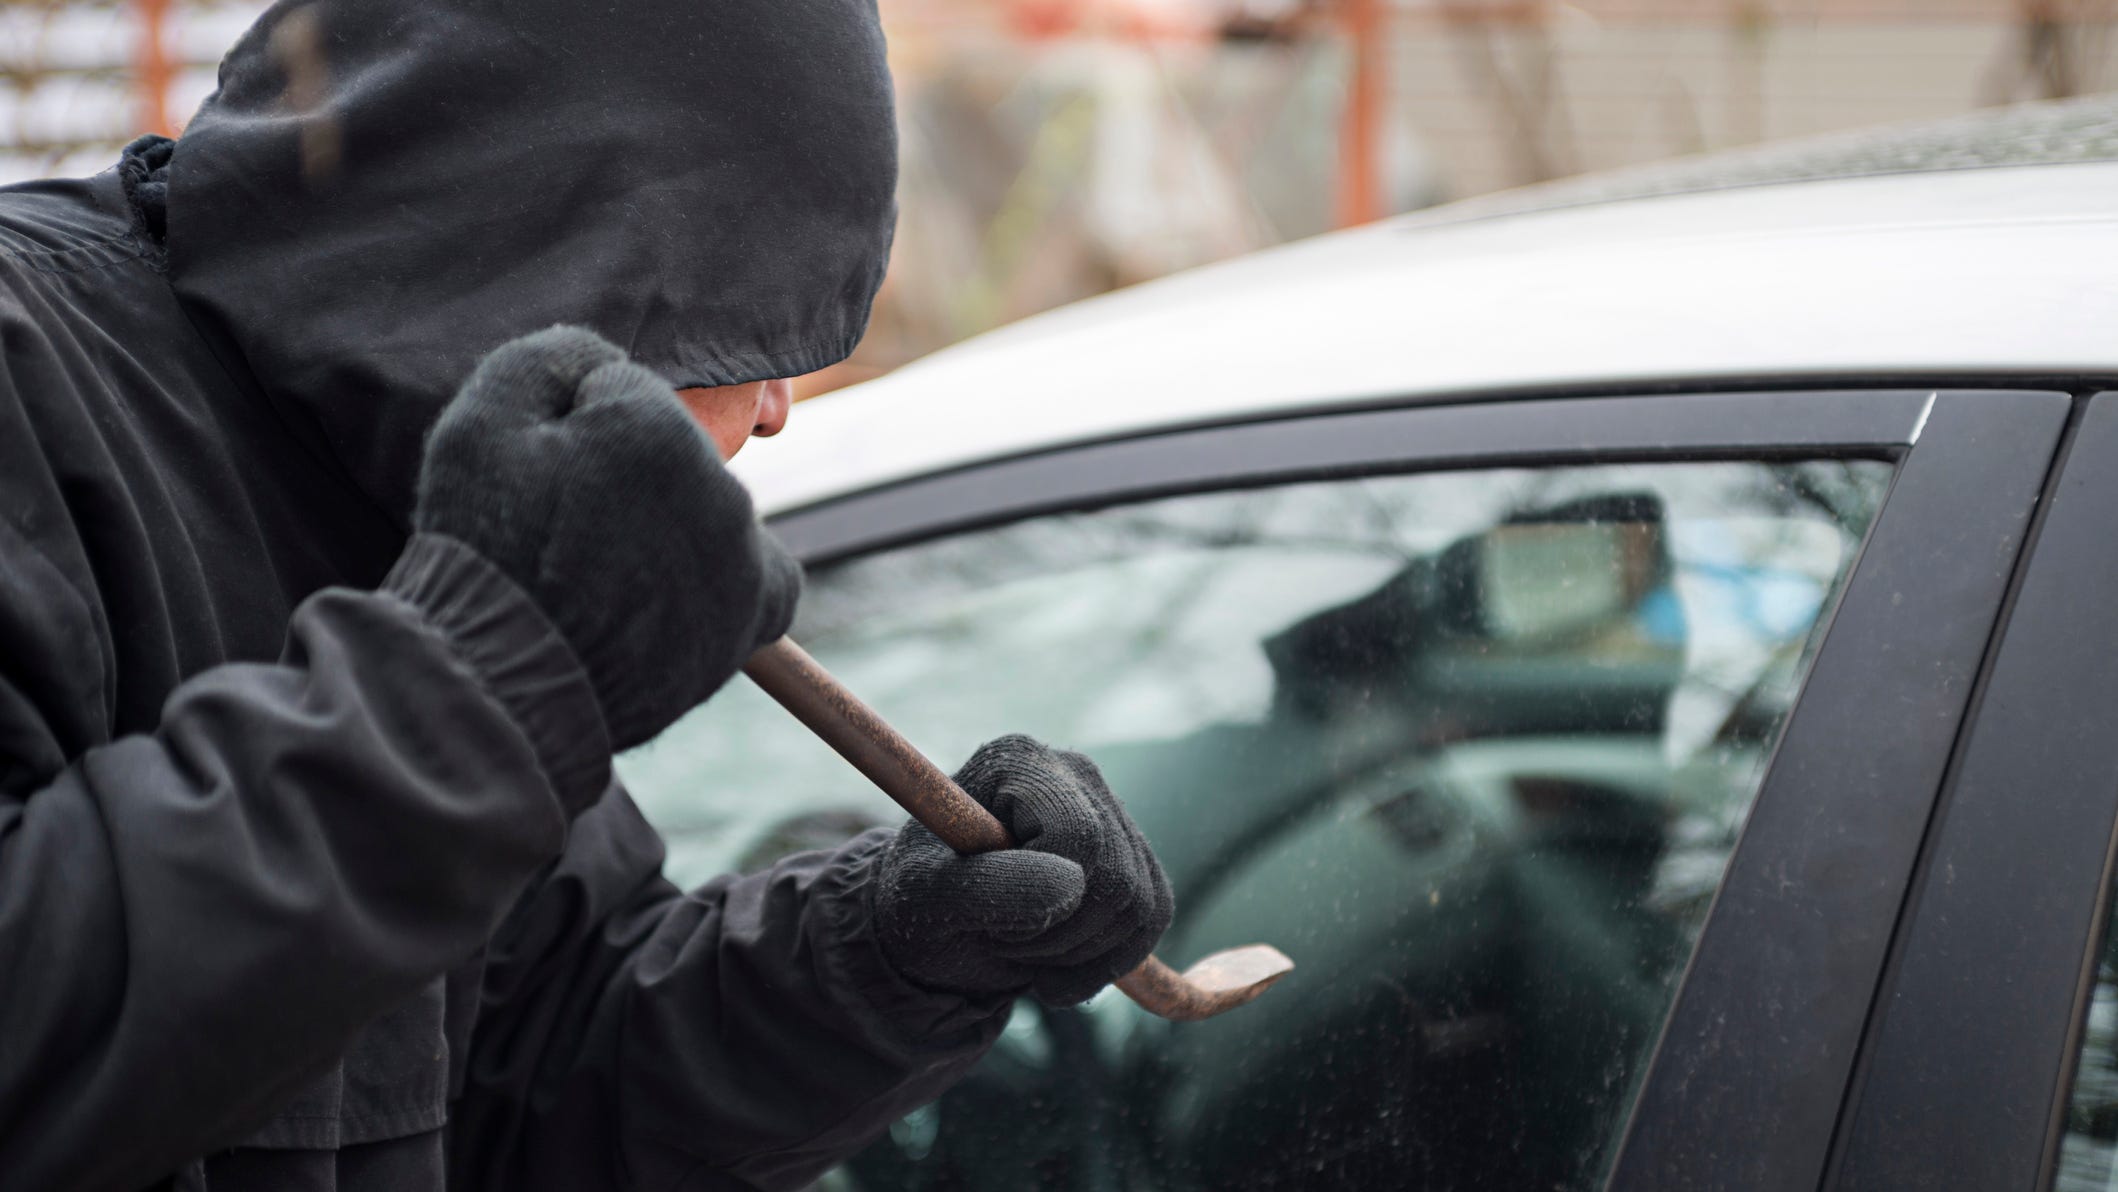 4 important tips to guard against the rise of car burglaries